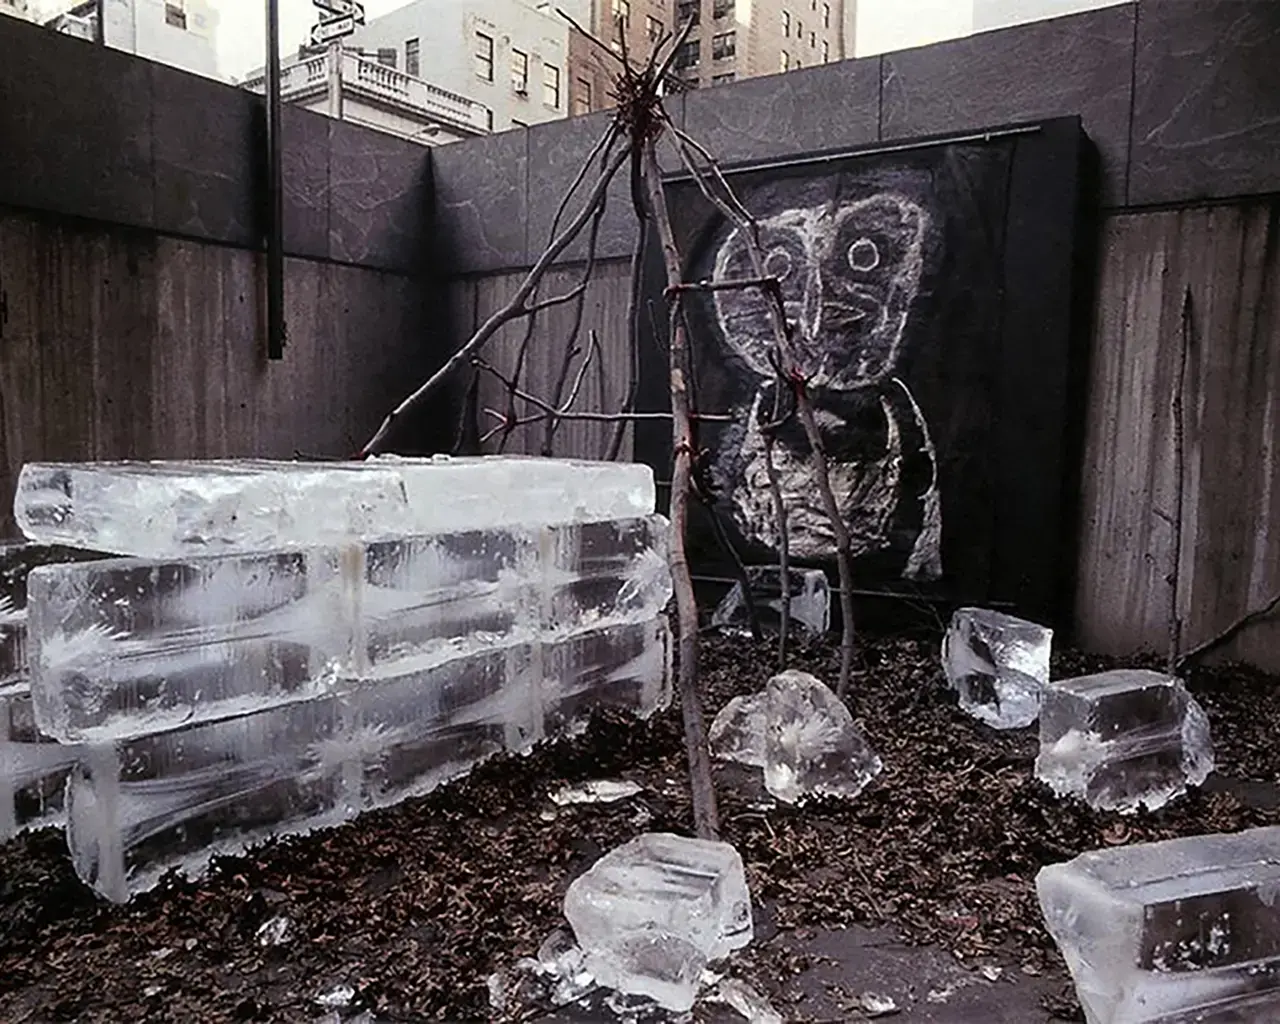 Rafael Ferrer, Fuegian House with Harpy Eagle, 1971, leaves, ice, tarp, branches, paint, Whitney Museum of American Art, New York. Photo by Marcia Tucker.